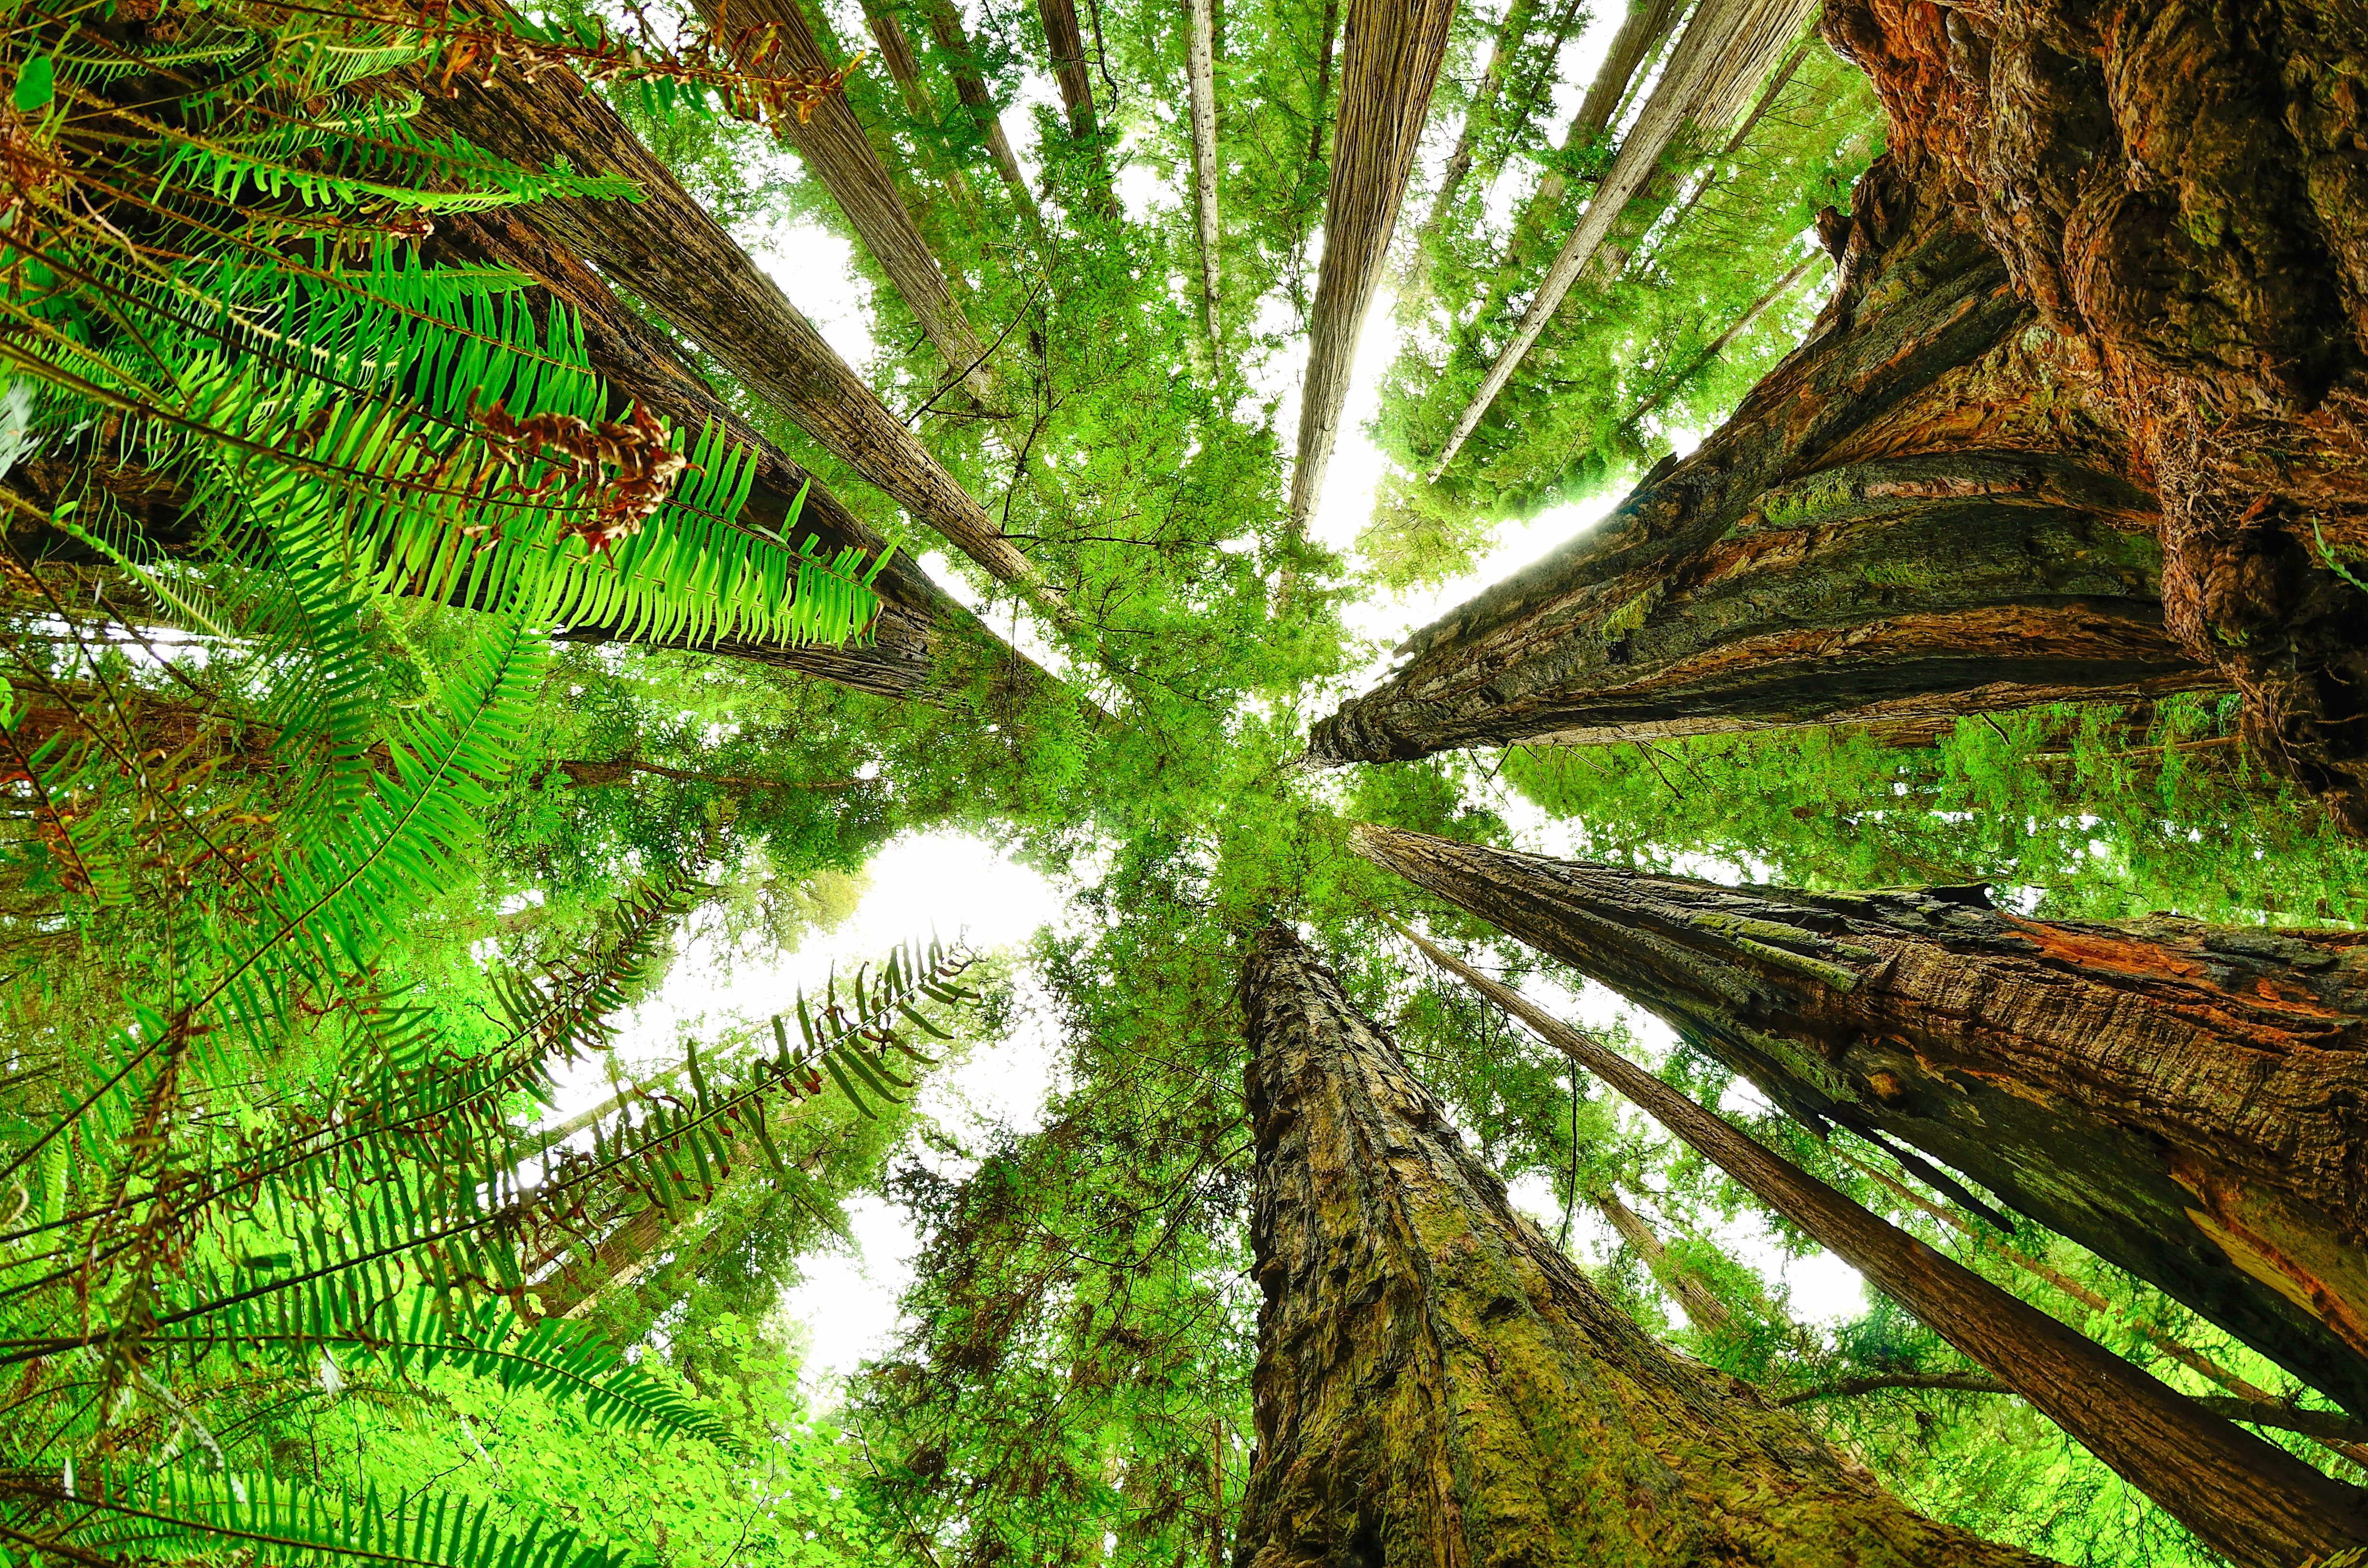 Fish-eye view of Redwood canopy